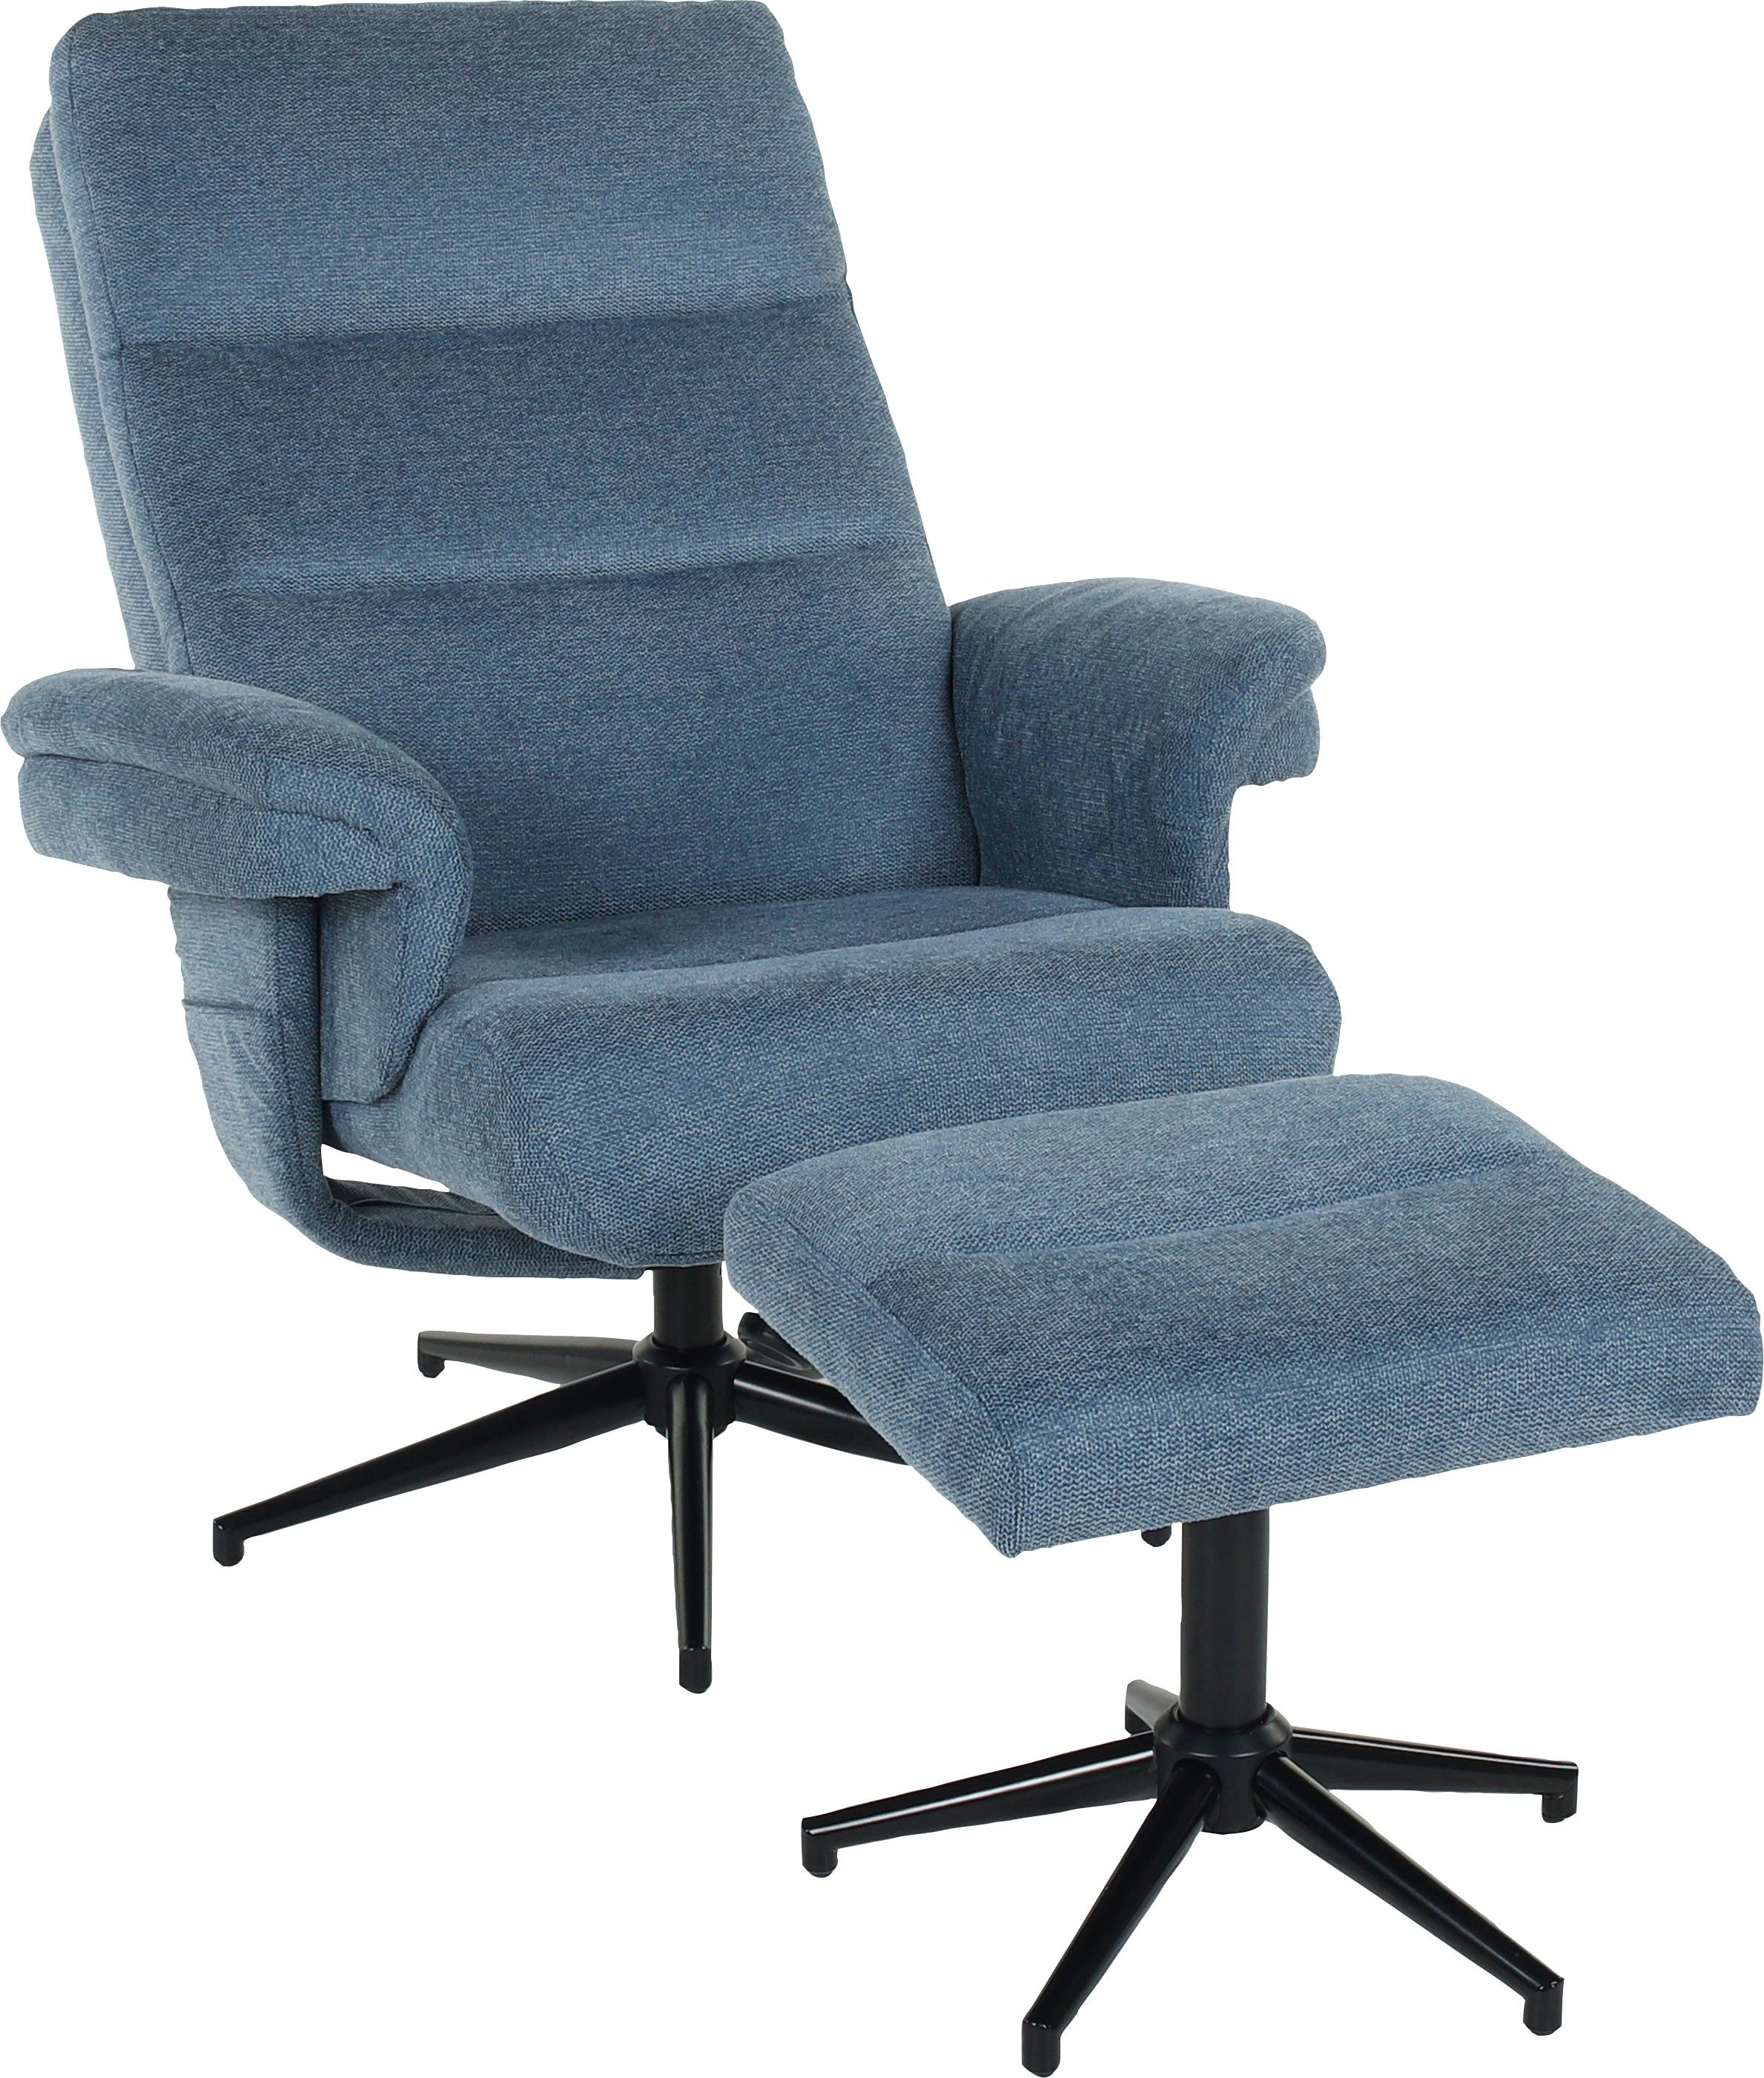 Duo Collection Relaxfauteuil Whitelaw